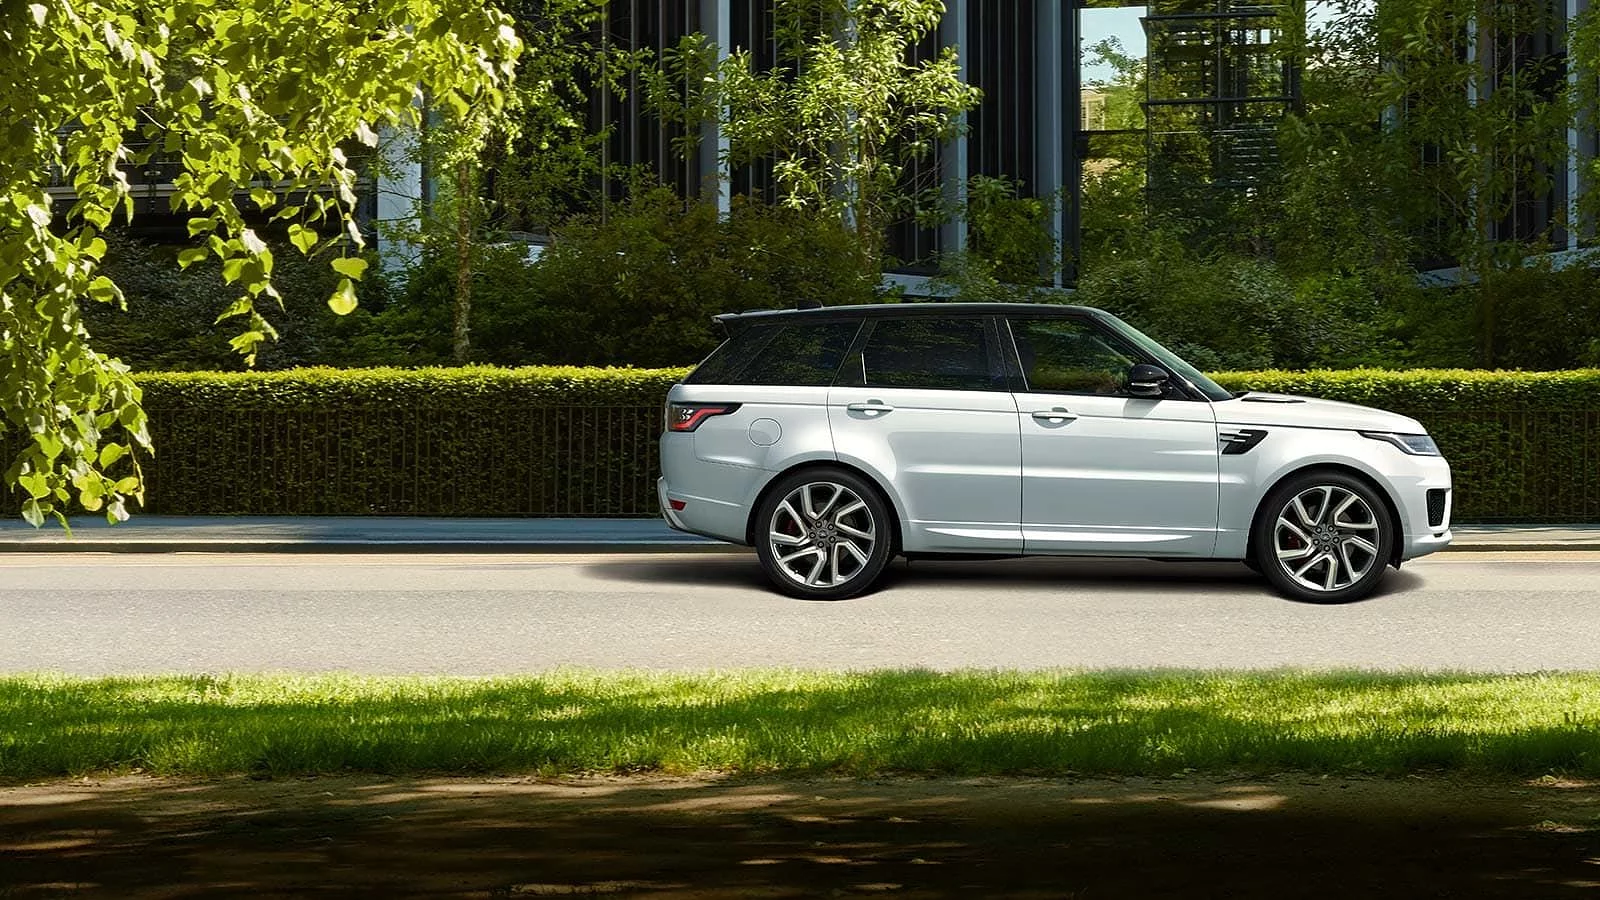 A luxury Range Rover Sport car driving on the street